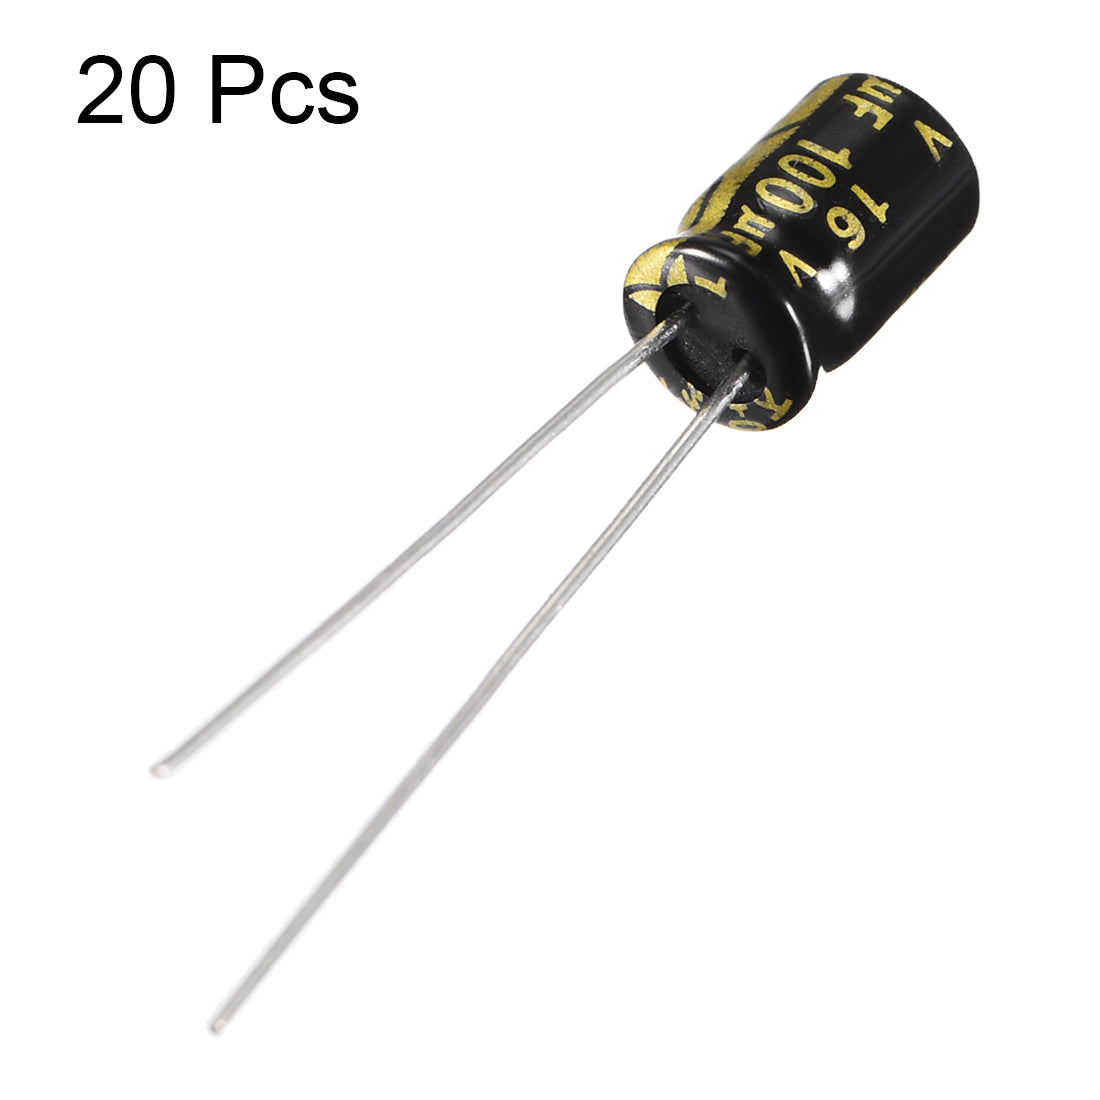 uxcell Uxcell Aluminum Radial Electrolytic Capacitor with 100uF 16V 105 Celsius Life 2000H 5 x 7 mm Black 20pcs